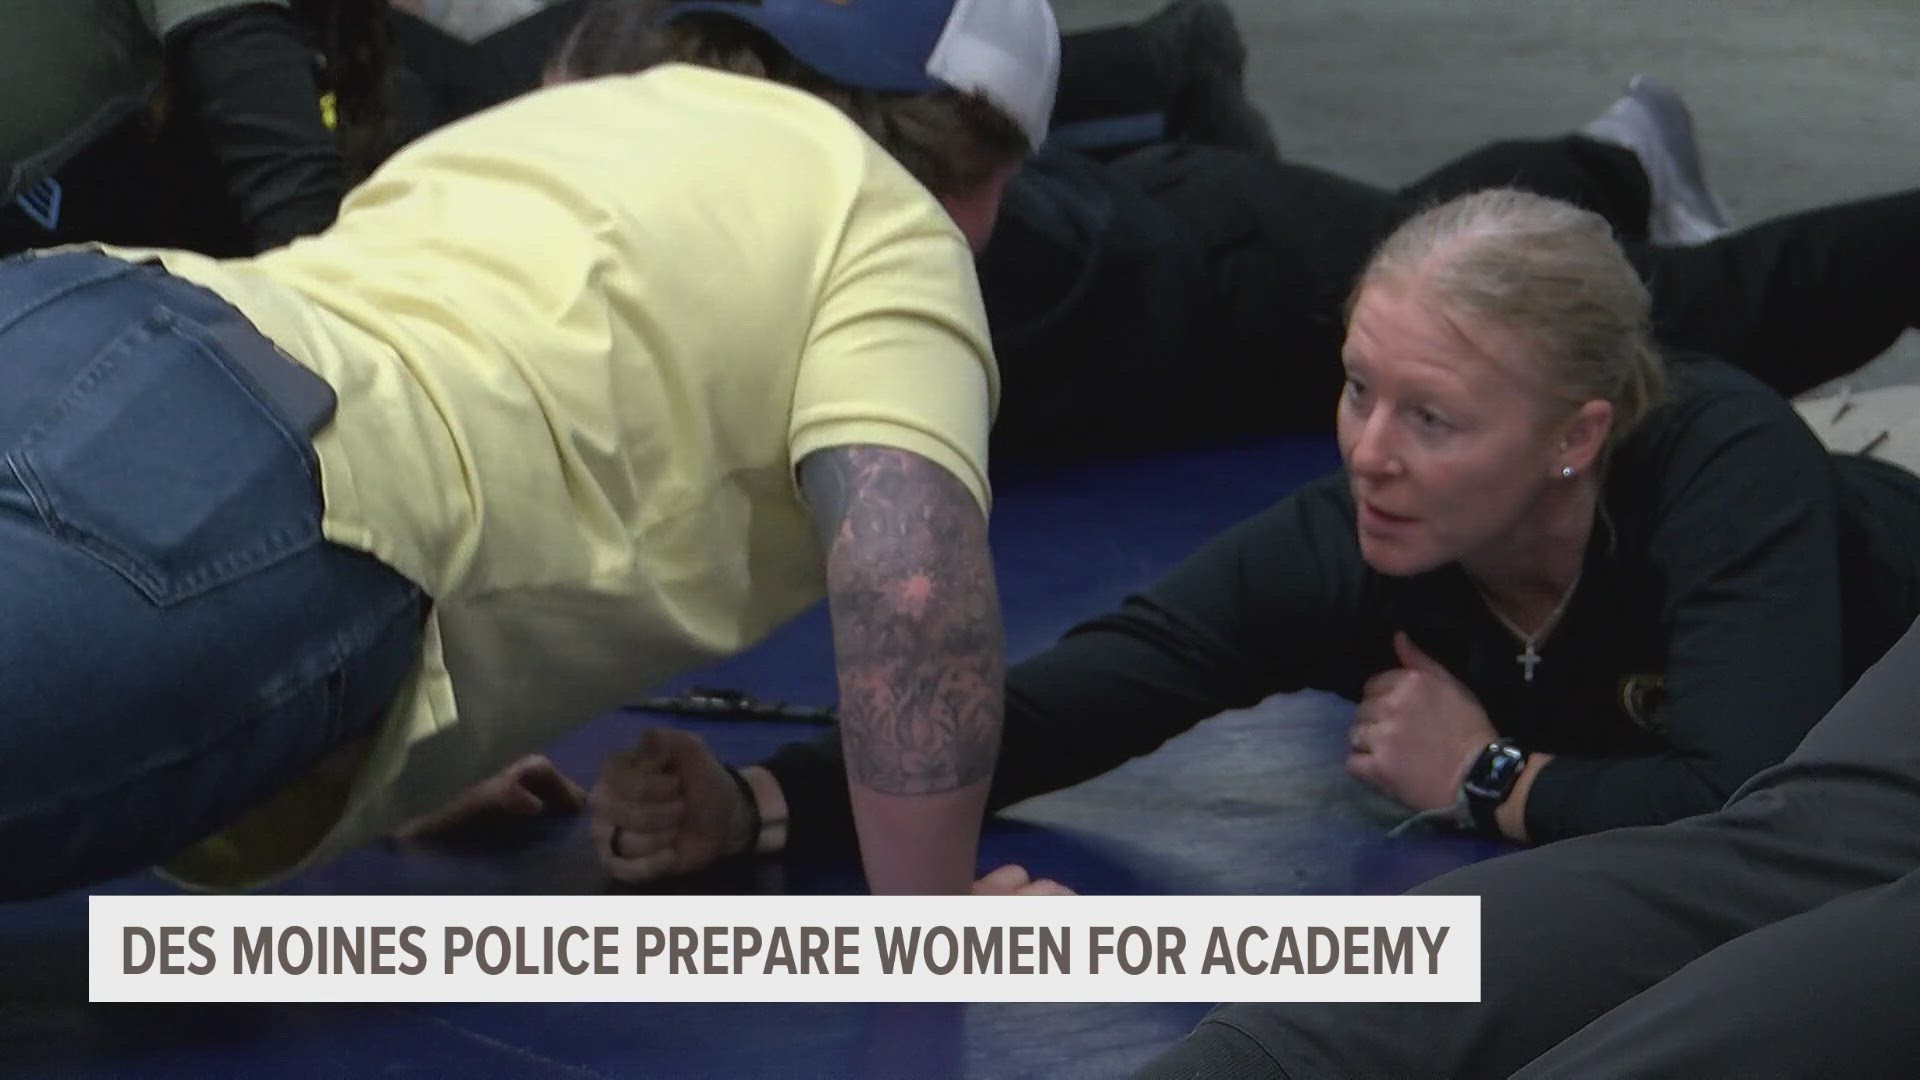 Only 12% of officers in the Des Moines Police Department are women. On Saturday, they trained and informed new and hopeful police academy recruits.